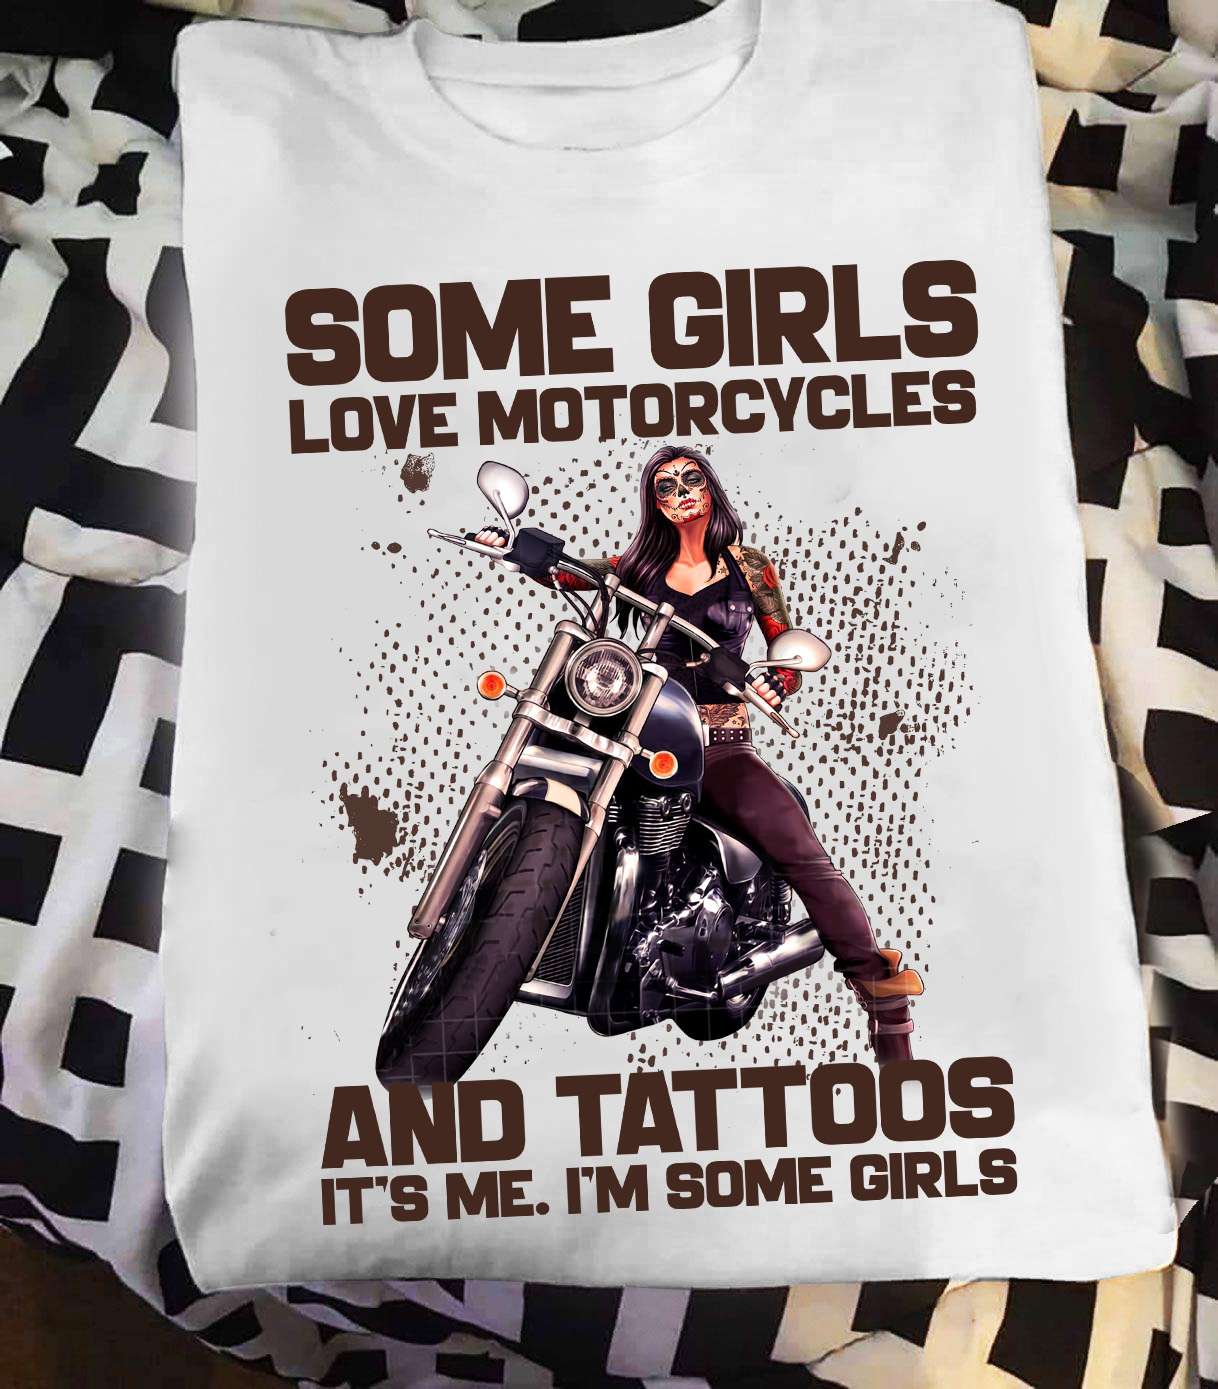 Tattoos Girl Love Motorcycles - Some girls love motorcycles and tattoos it's me i'm some girls